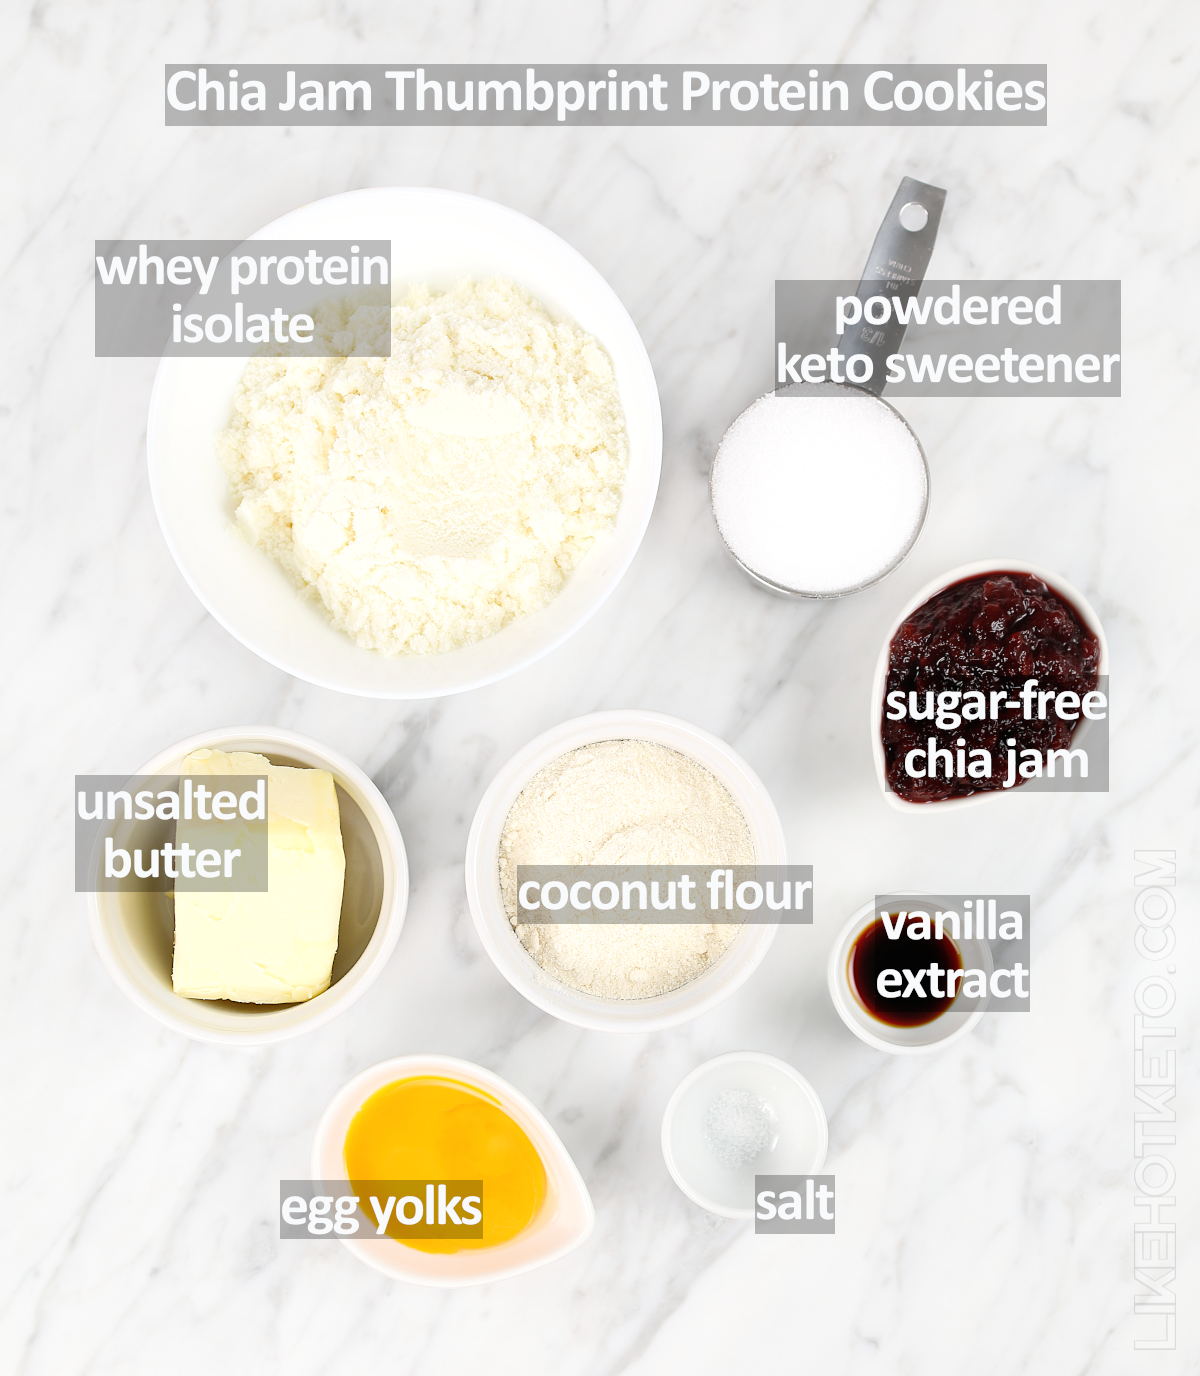 Ingredients for keto thumbprint cookies with chia jam: whey protein, coconut flour, egg yolks, unsalted butter, keto sweetener, salt and sugar-free jam.